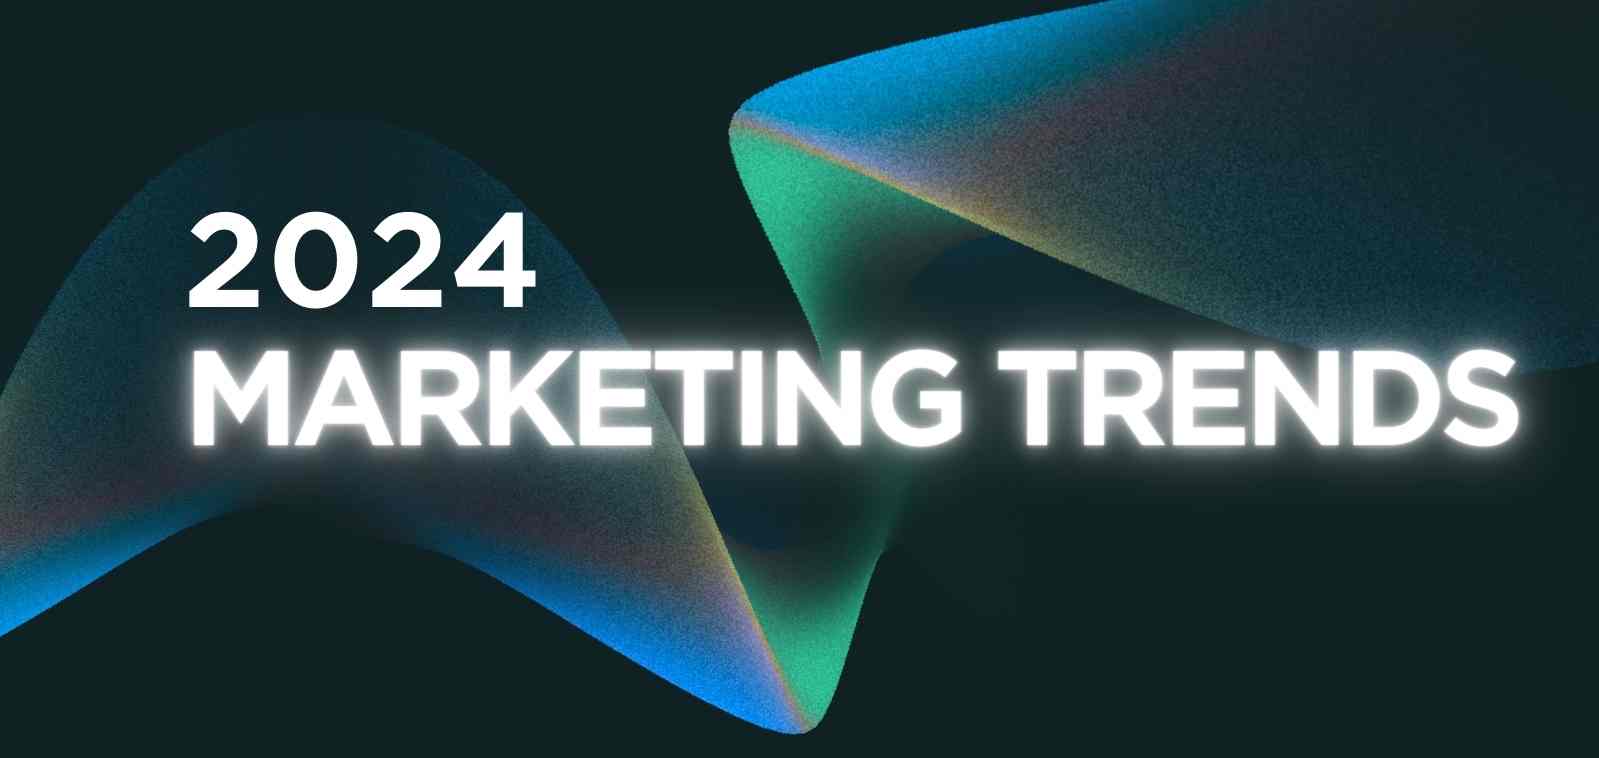 2024 Marketing Trends What to Expect in the Digital World